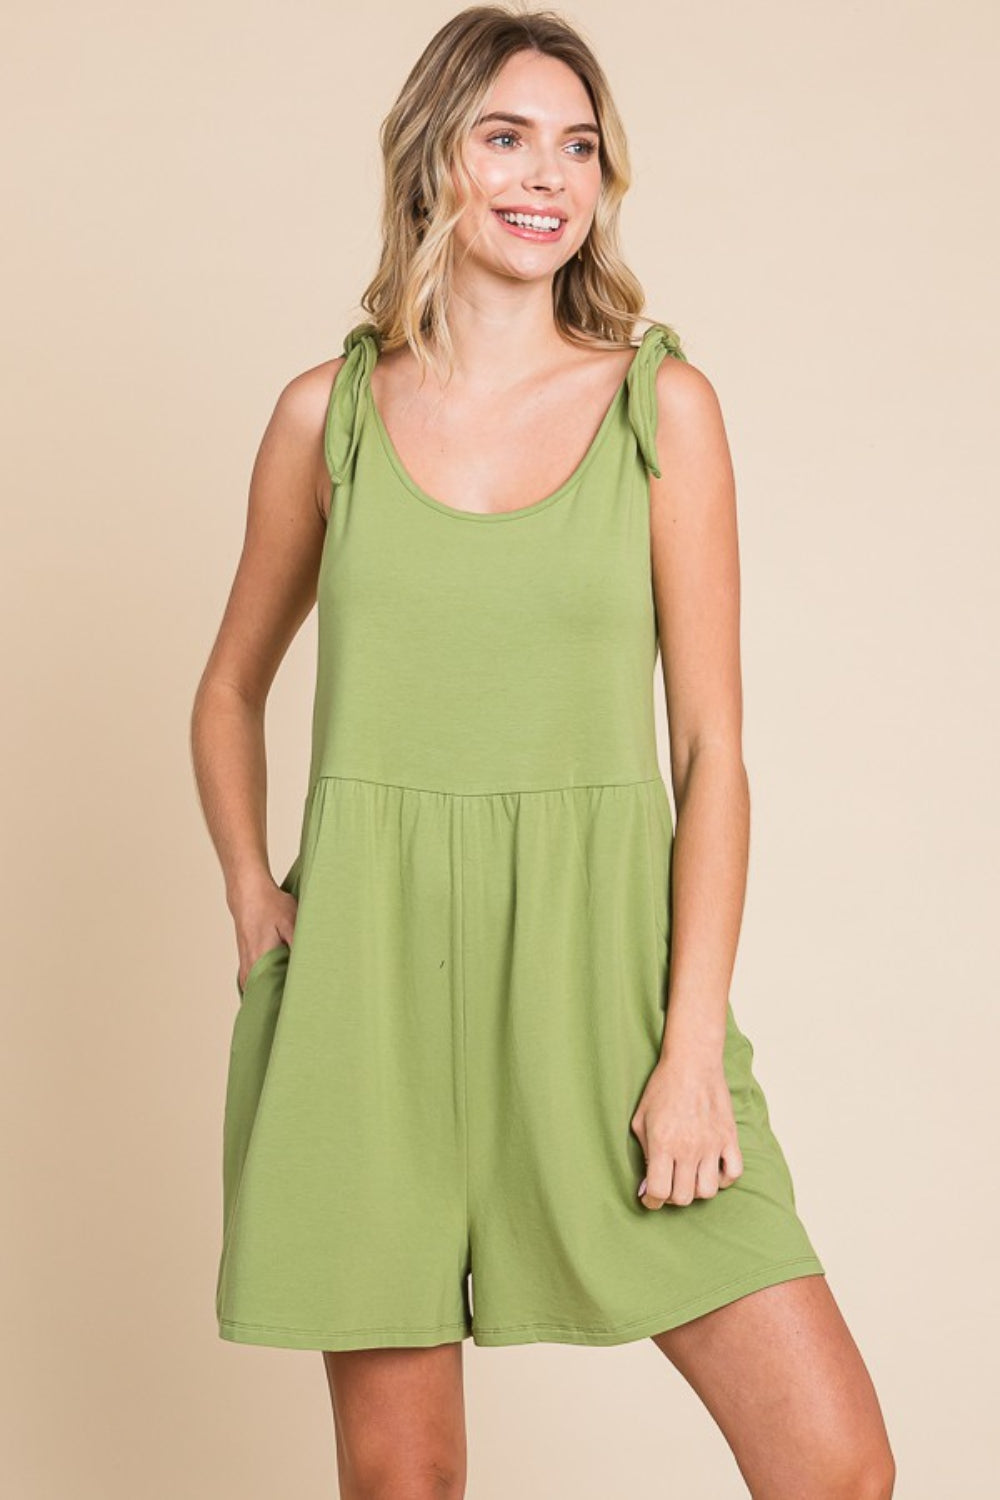 The Shoulder Knot Baggy Romper is a trendy and comfortable choice for those who love effortless style. With its baggy fit and unique shoulder knot detail, this romper boasts a relaxed yet fashionable look. The shoulder knot adds a touch of playful charm, while the loose fit ensures maximum comfort. S-3X